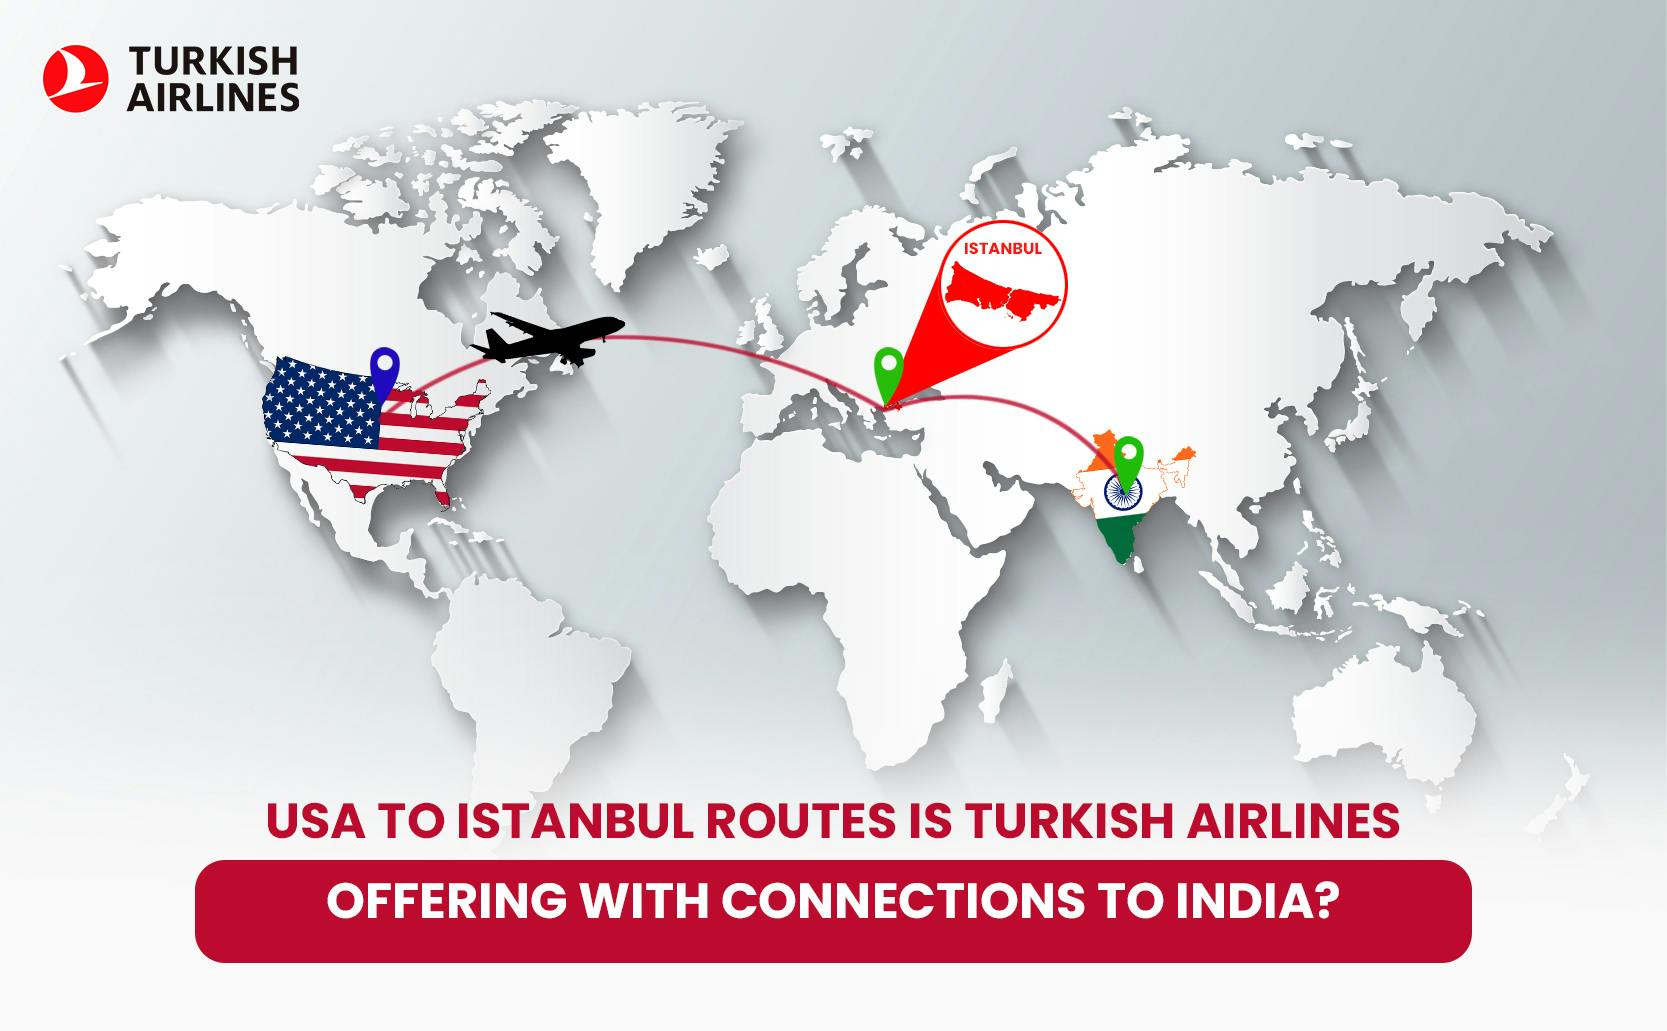 Which New Routes is Turkish Airlines Offering from the USA to Istanbul with Connections to India?